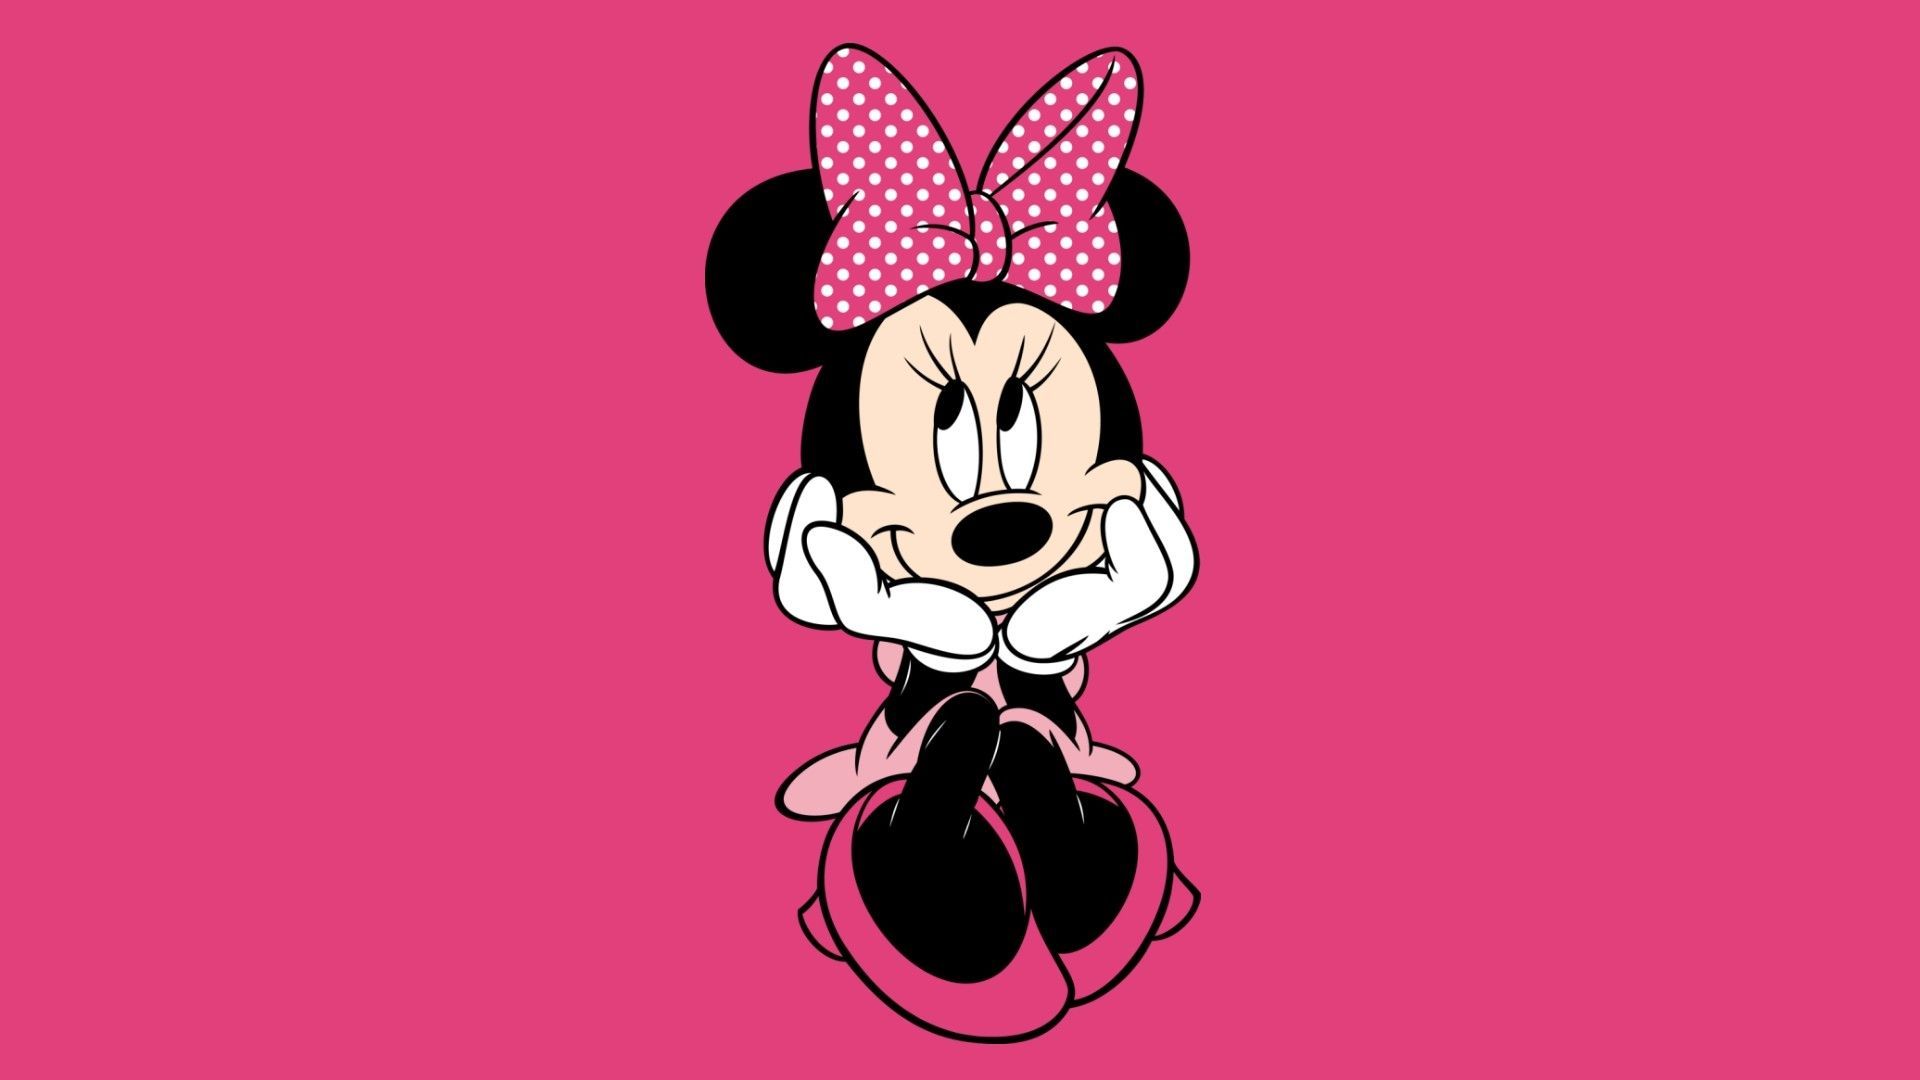 Minnie Mouse Laptop Wallpaper Free Minnie Mouse Laptop Background